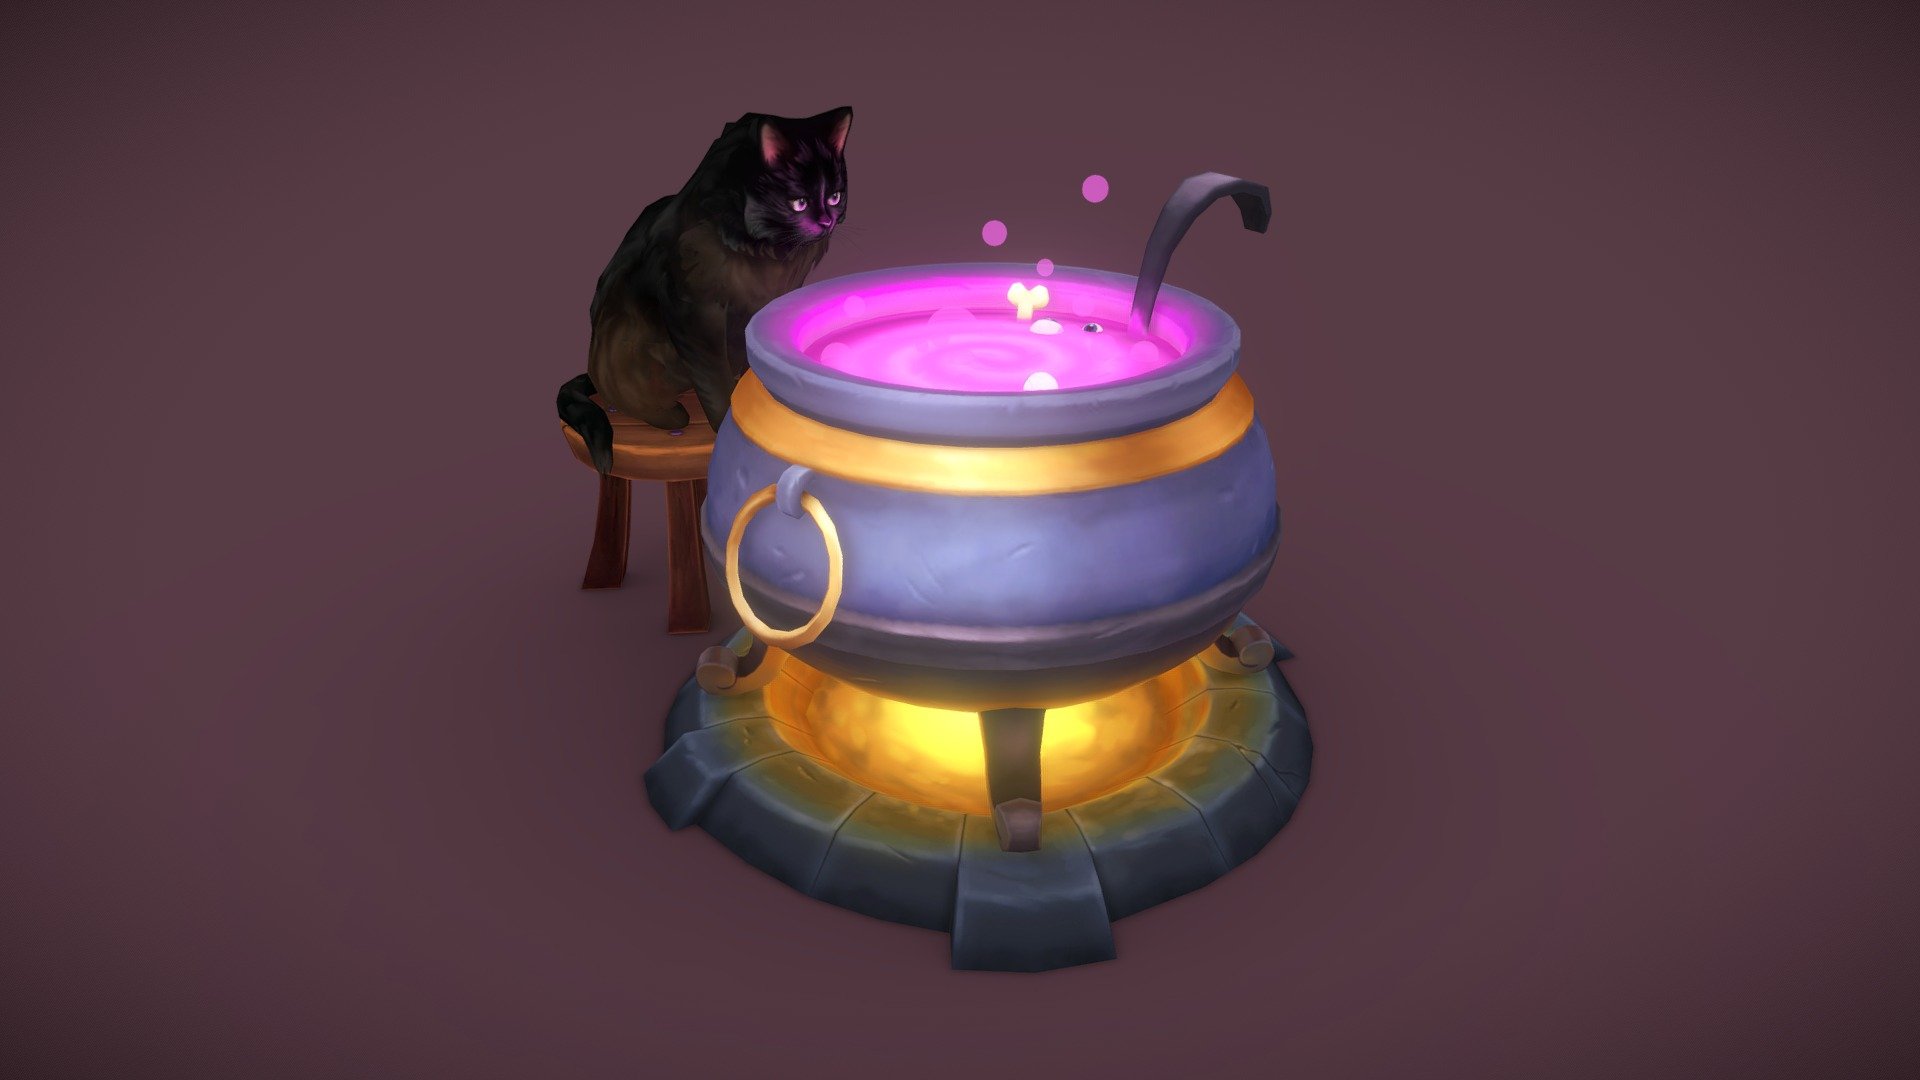 A handpainted piece that I've been thinking about since Halloween. Always wanted to do a magical cauldron and I've been trying to work on adding characters to my scenes. Wanted to tell a bit of a story with this curios cat, and she is based on a silly cat that I have been getting to know 3d model